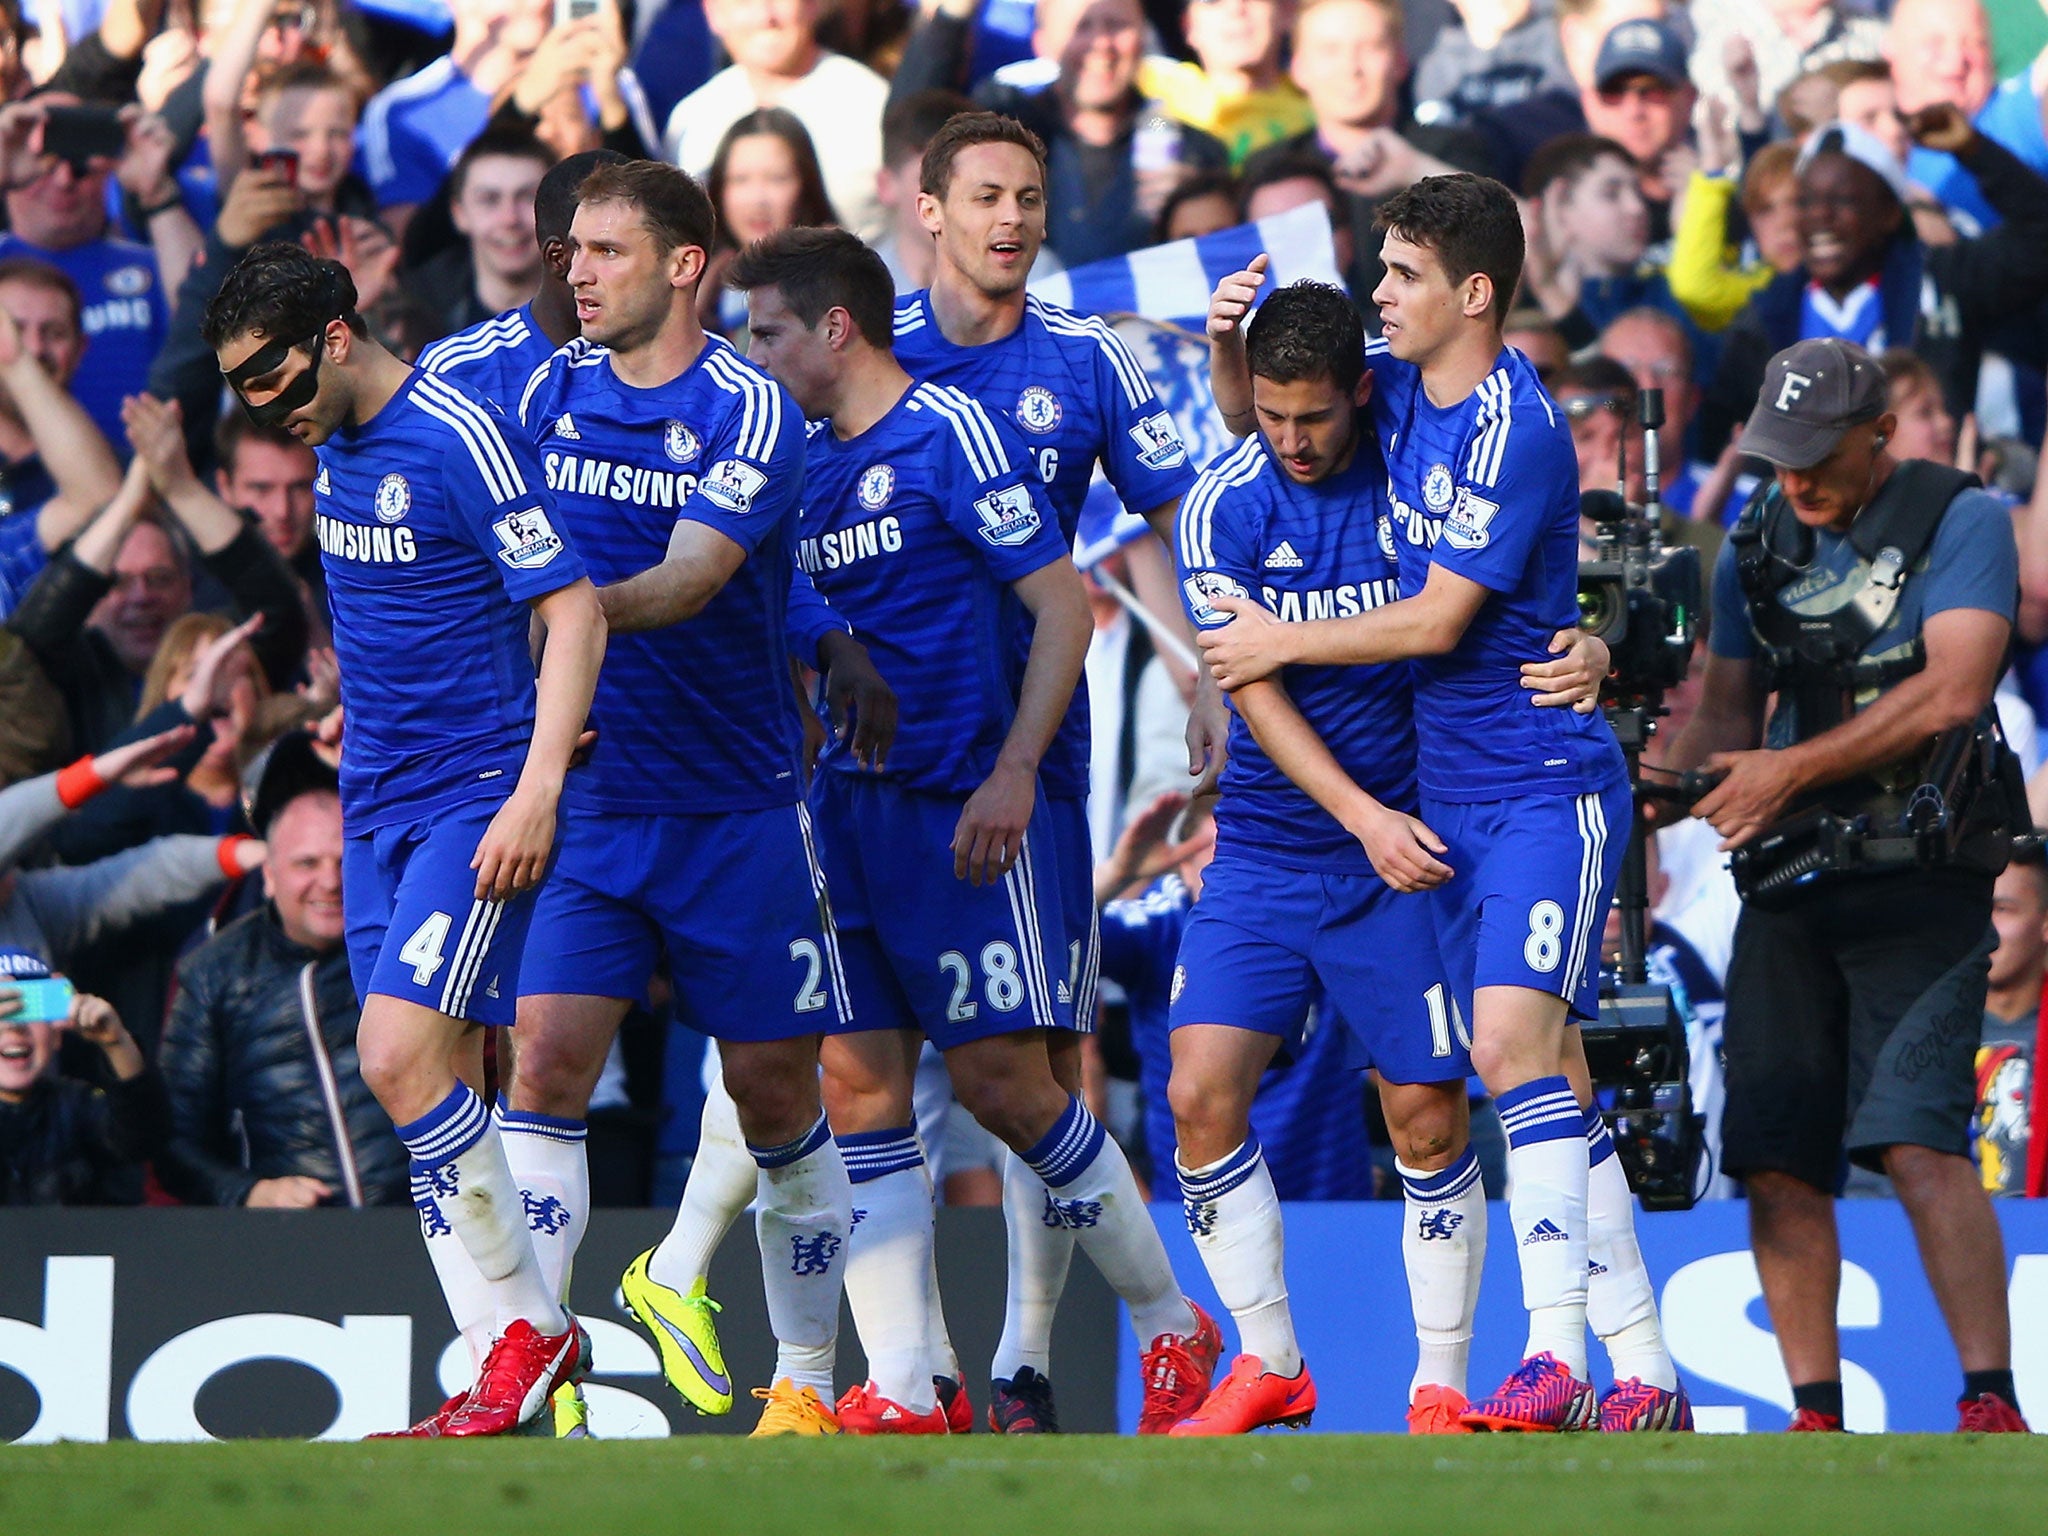 Chelsea celebrate after Hazard scores the winner against Manchester United